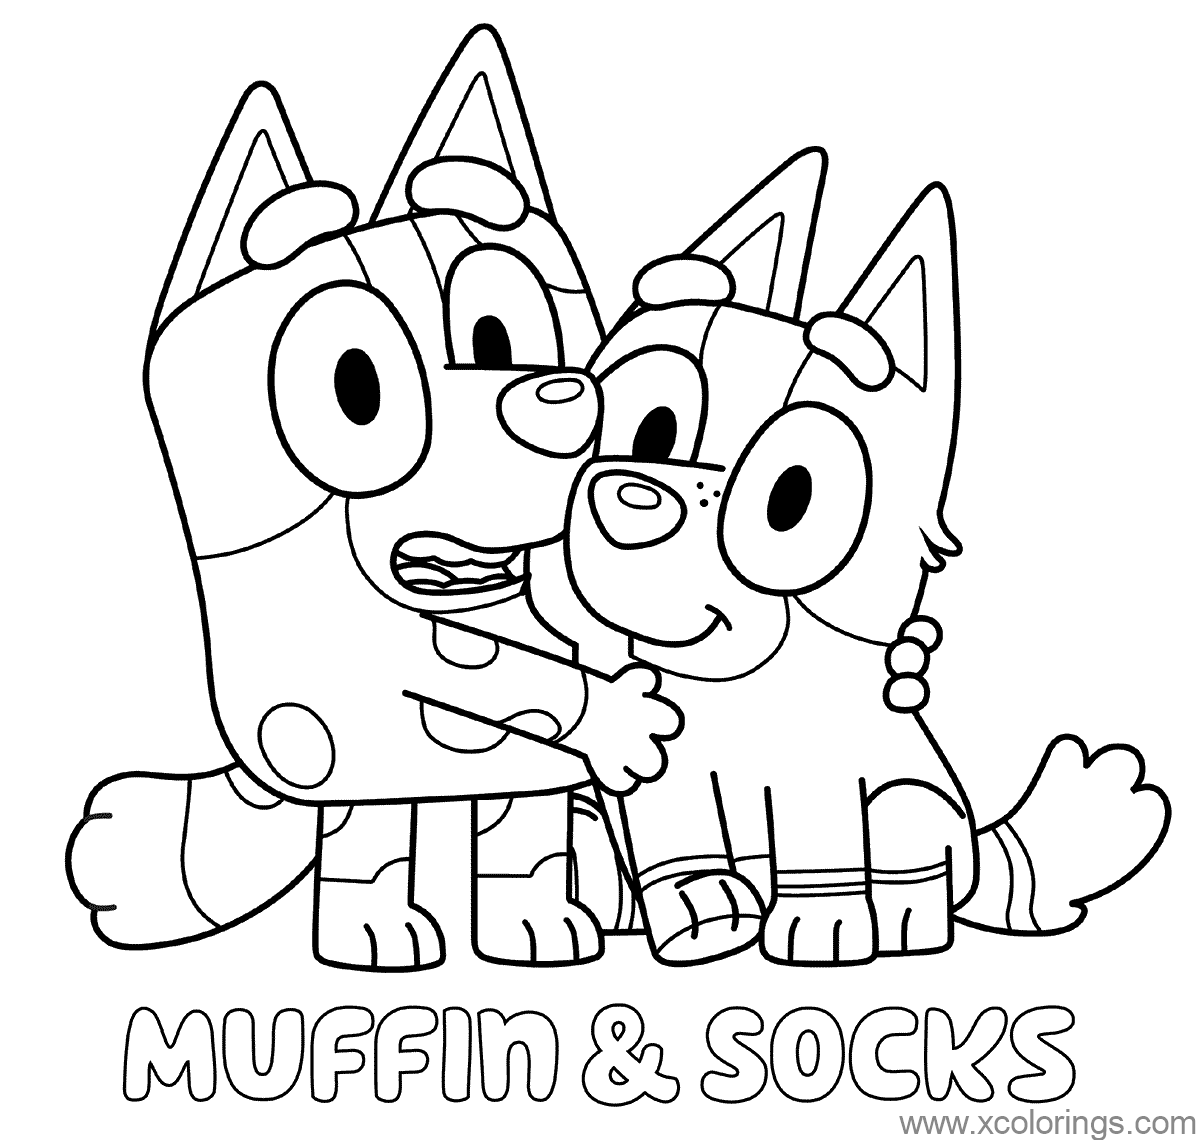 bluey-characters-coloring-pages-xcolorings